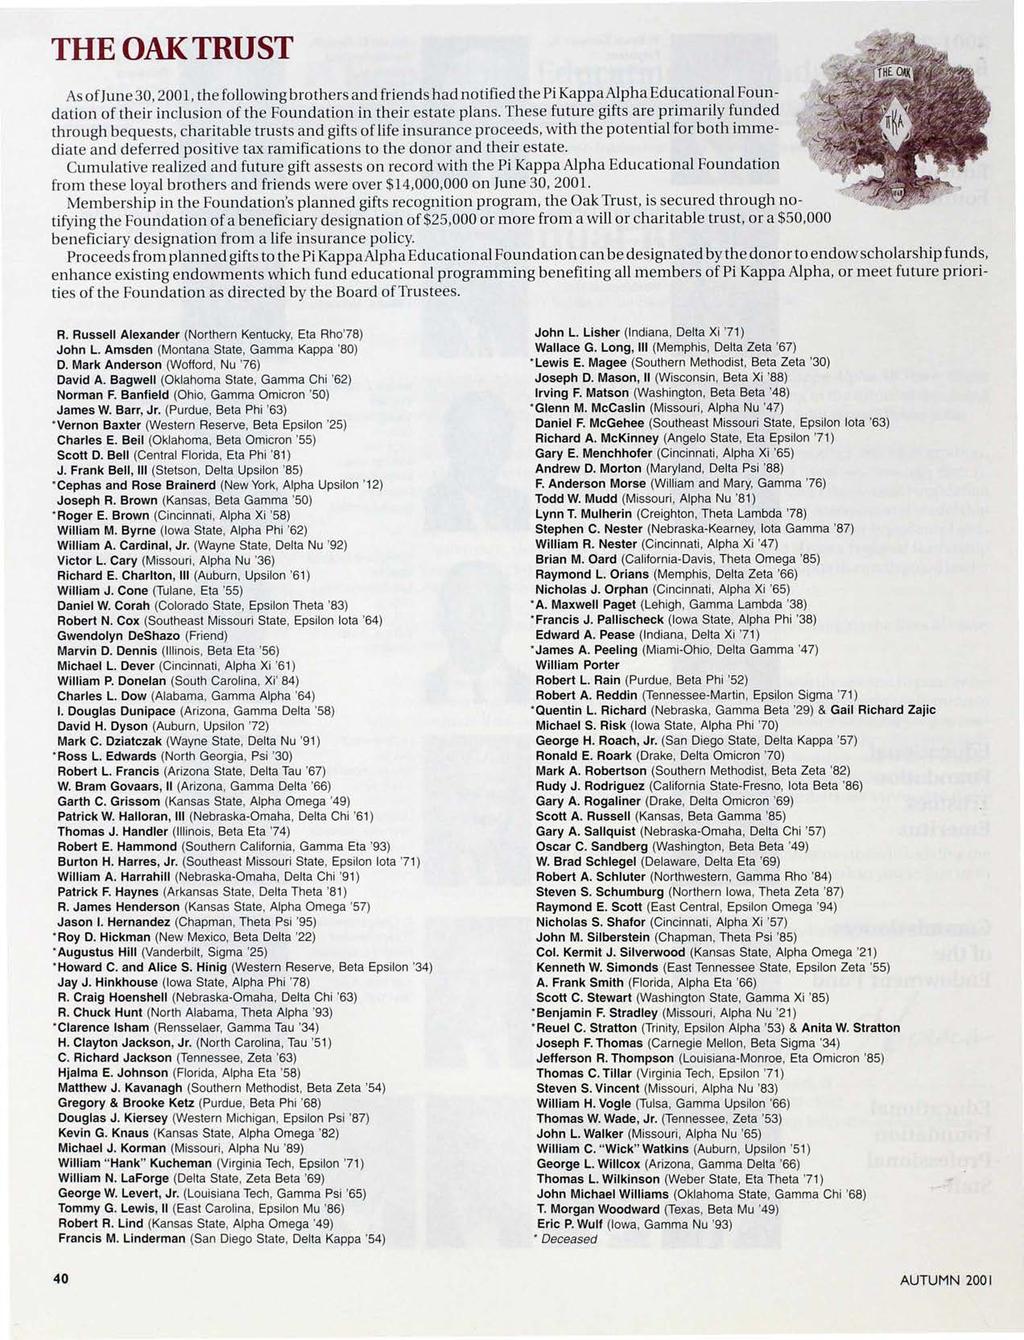 THE OAK TRUST As ofjune 30, 2001, the following brothers and friends had notified the Pi Kappa Alpha Educational Foundation of their inclusion of the Foundation in their estate plans.